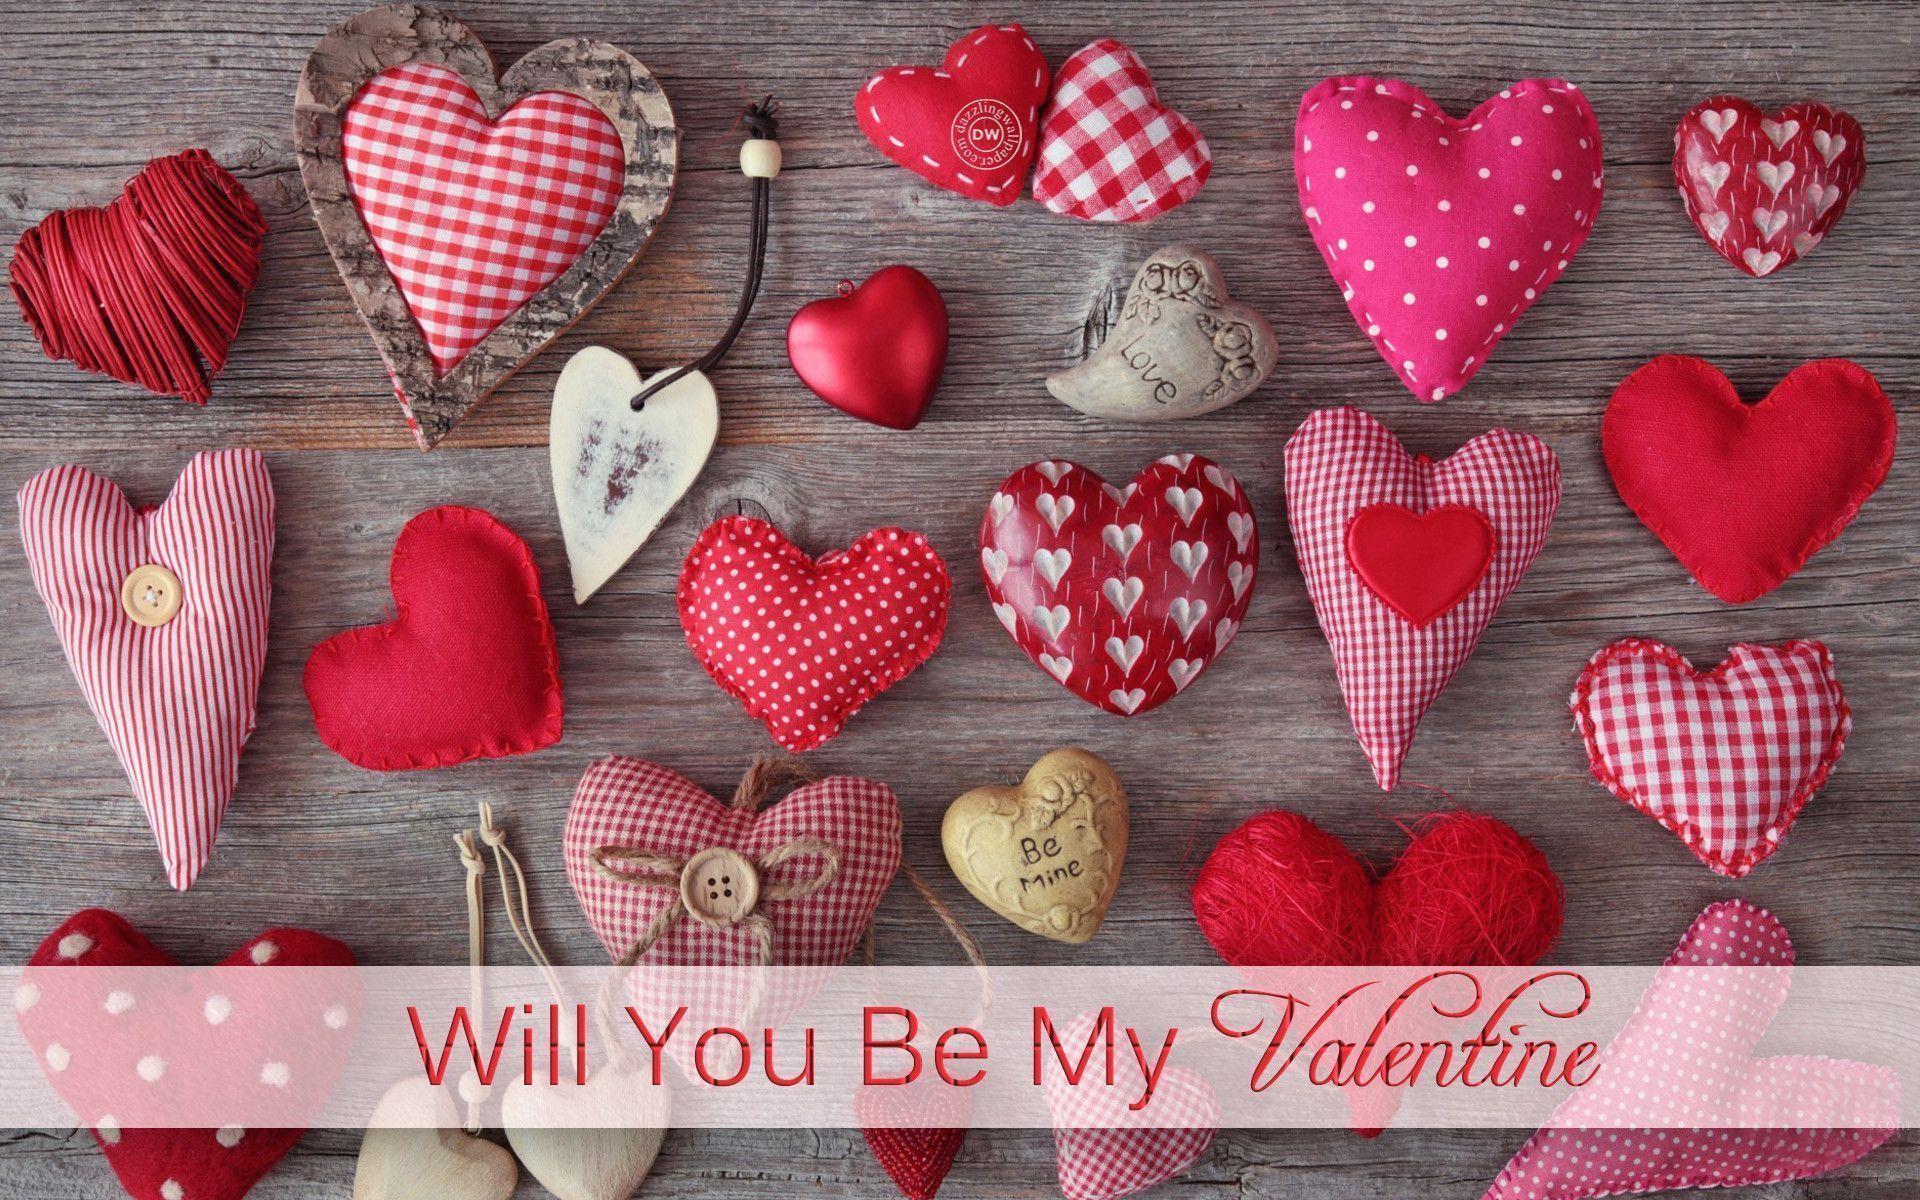 Cute Valentine's Day Wallpapers - Wallpaper Cave